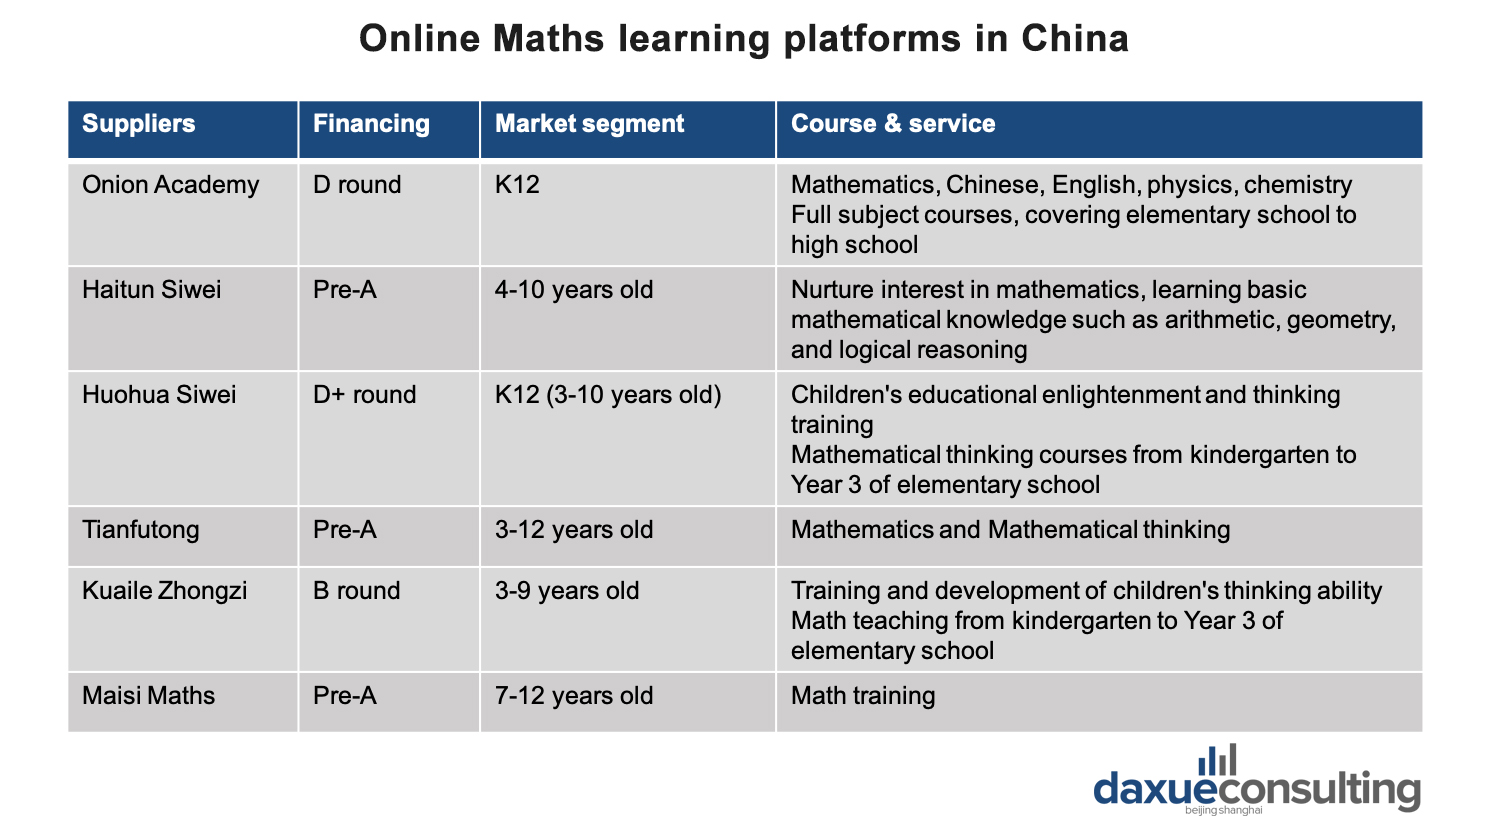 The market segment and course types provided by online Maths learning platforms are quite similar, reflecting fierce competition in a homogenous market.   